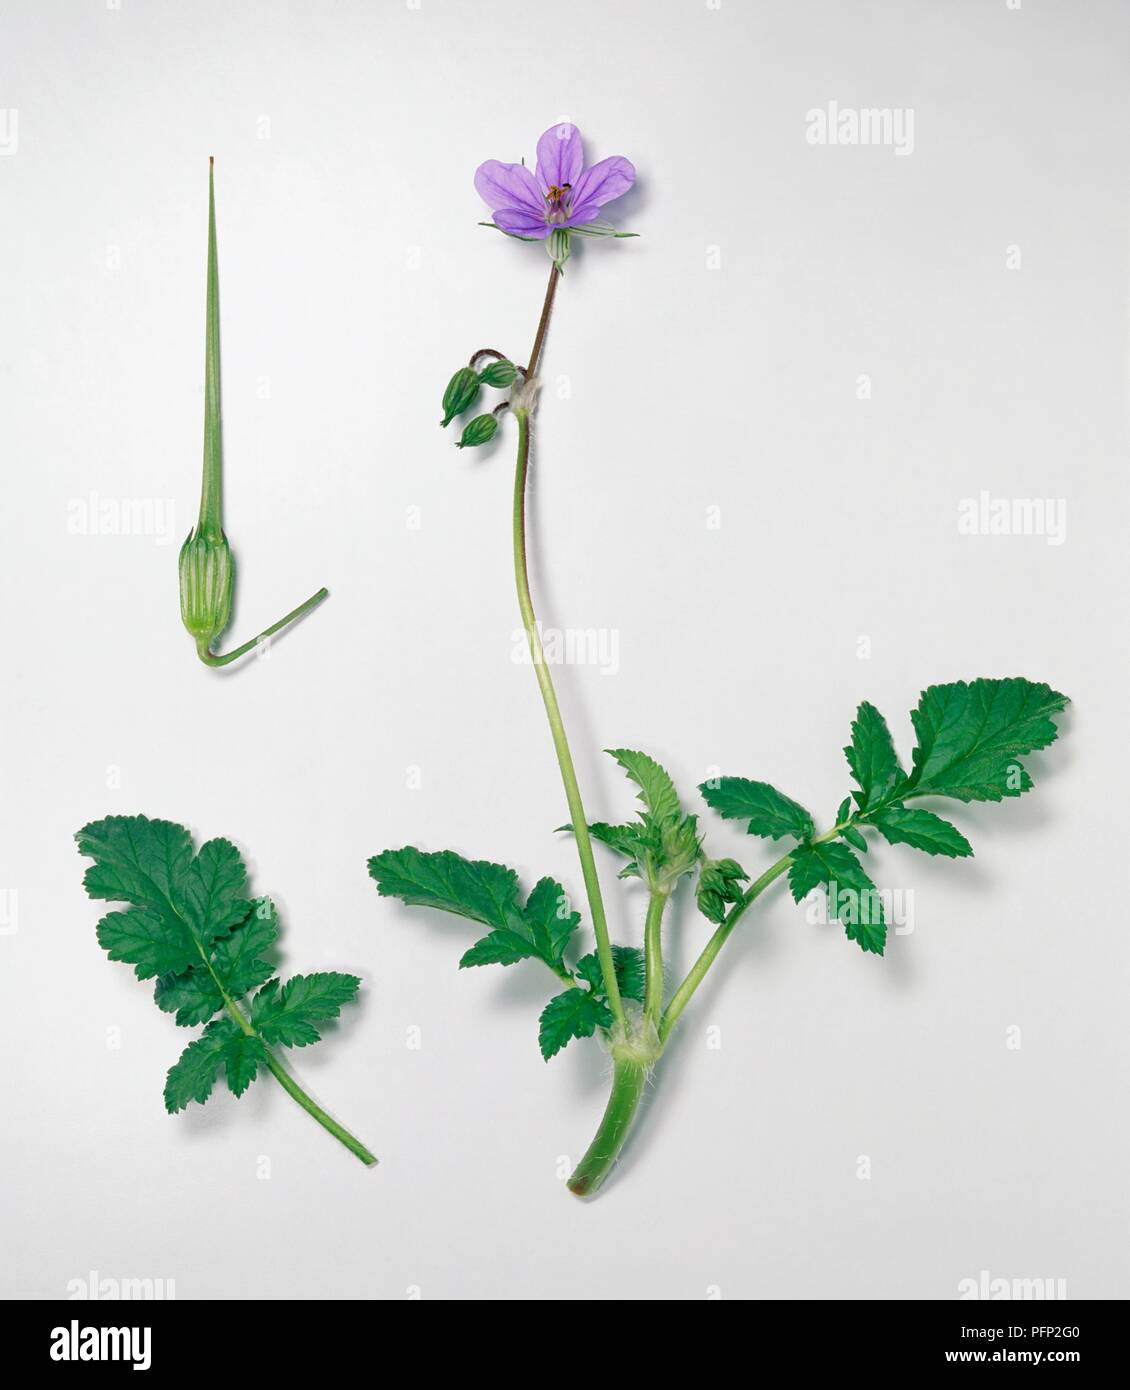 Erodium ciconium (Long-beaked Storksbill), puple flower, green buds and leaves on long stems Stock Photo